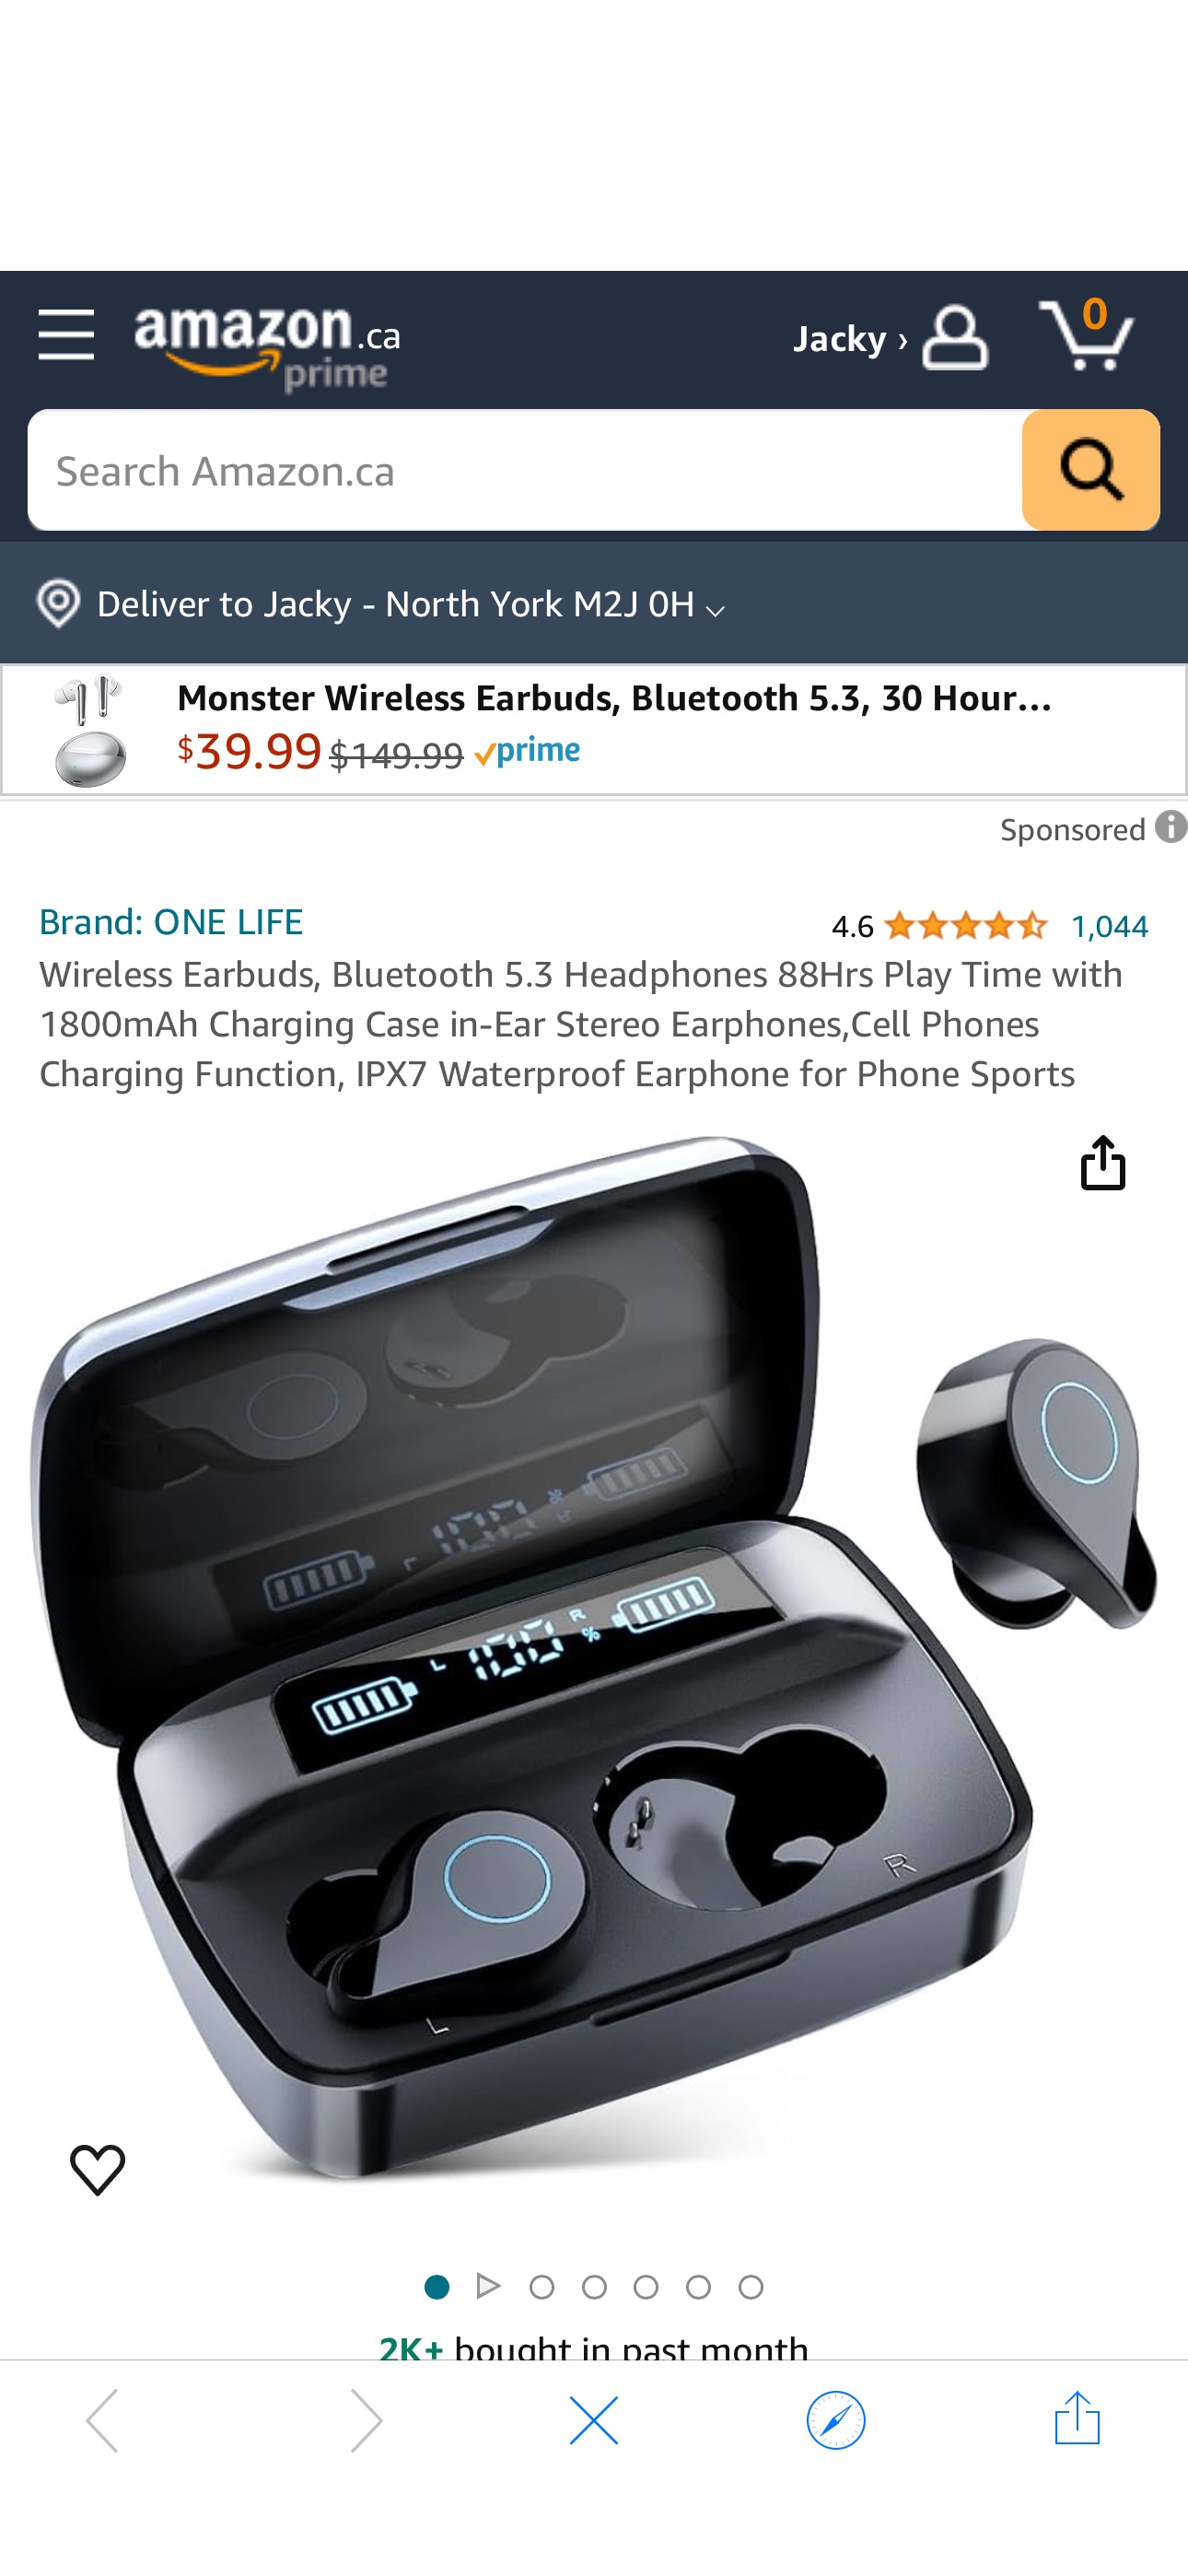 Wireless Earbuds, Bluetooth 5.3 Headphones 88Hrs Play Time with 1800mAh Charging Case in-Ear Stereo Earphones,Cell Phones Charging Function, IPX7 Waterproof Earphone for Phone Sports : Amazon.ca: Elec